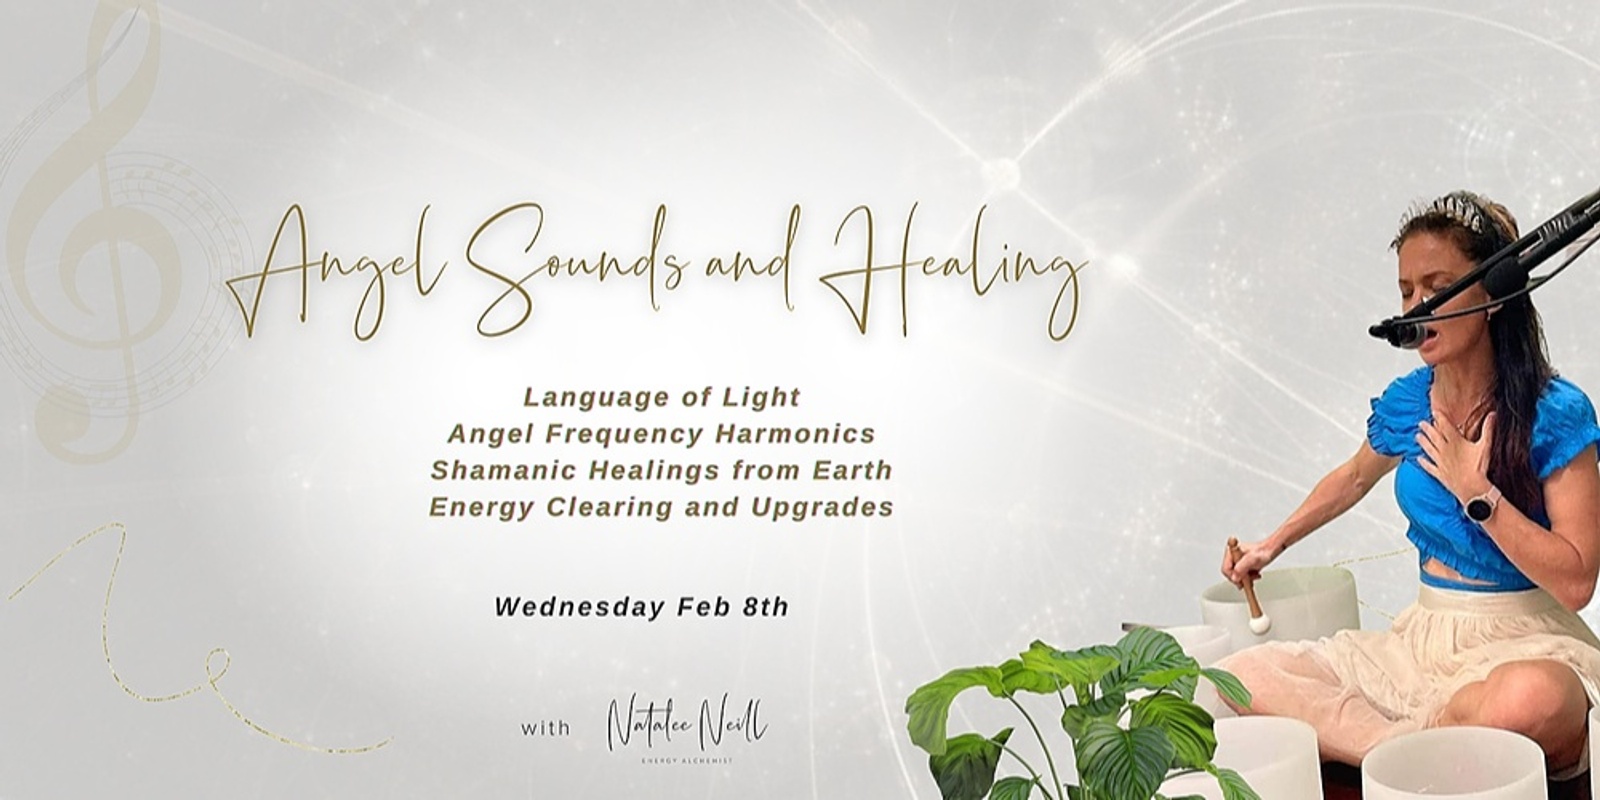 Banner image for Angel Sounds and Healing Journey Feb